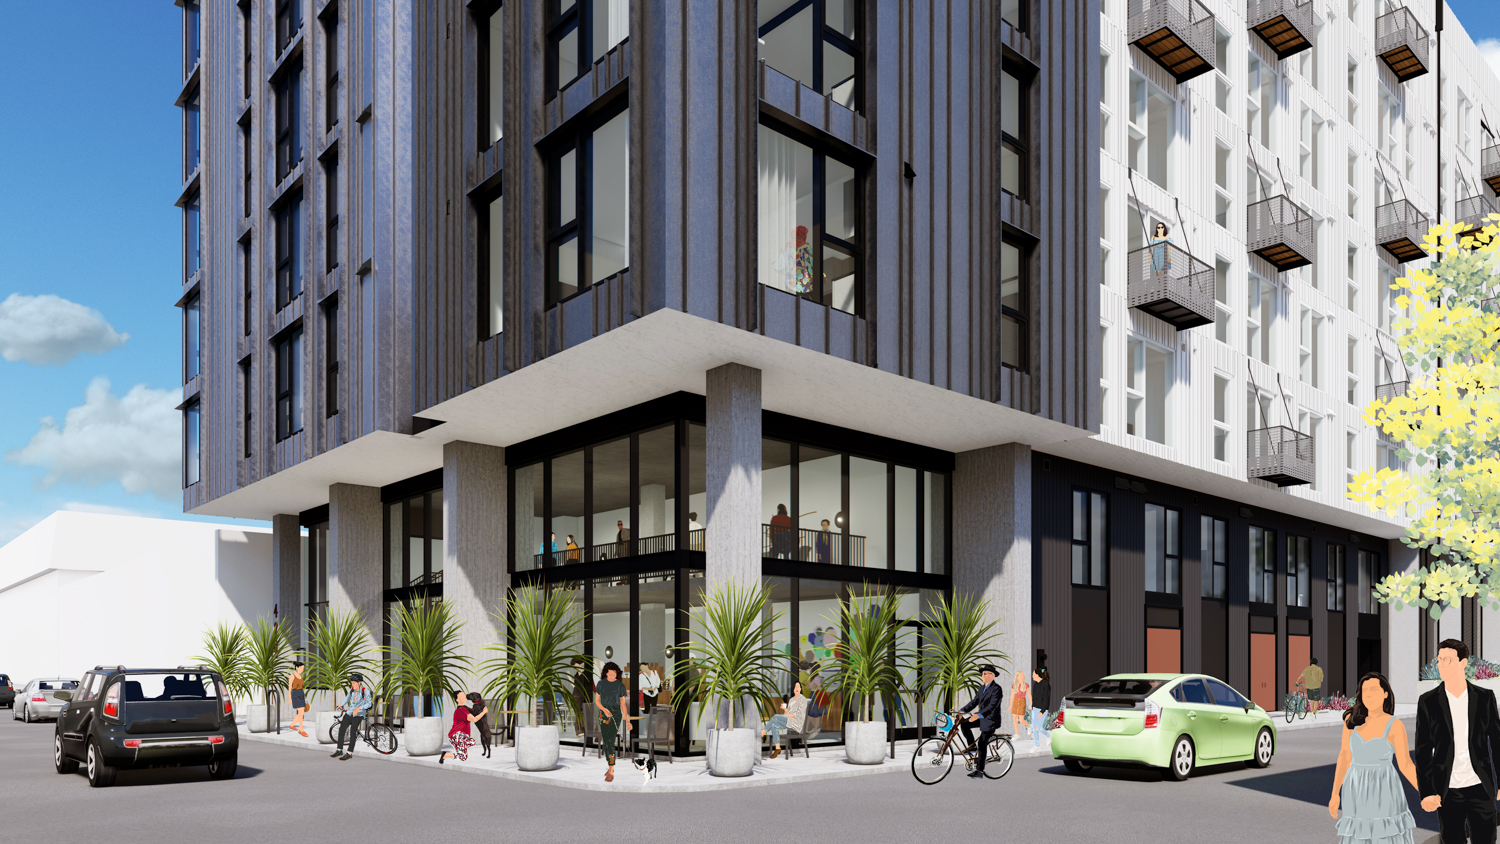 420 Mendocino Avenue seen from 5th and Riley Street, rendering by David Baker Architects